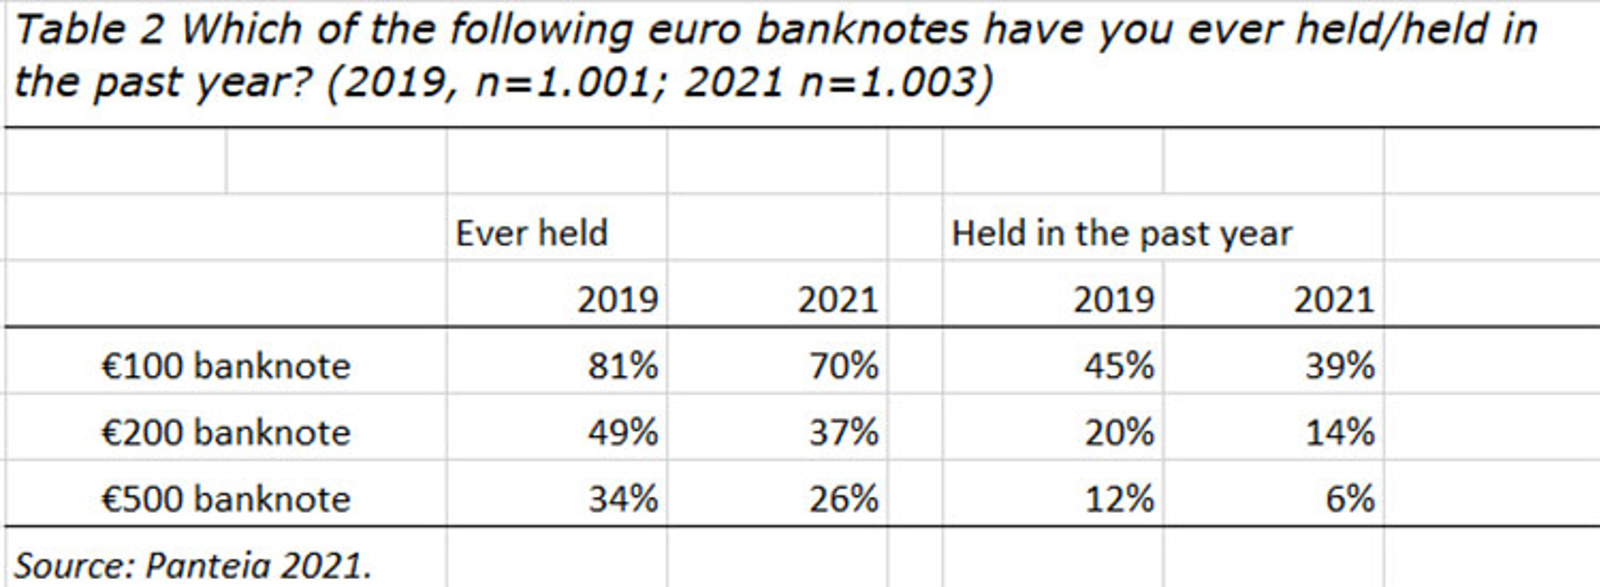 Which of the following euro banknotes have you ever held/held in the past year? (2019, n=1,001; 2021 n=1,003)